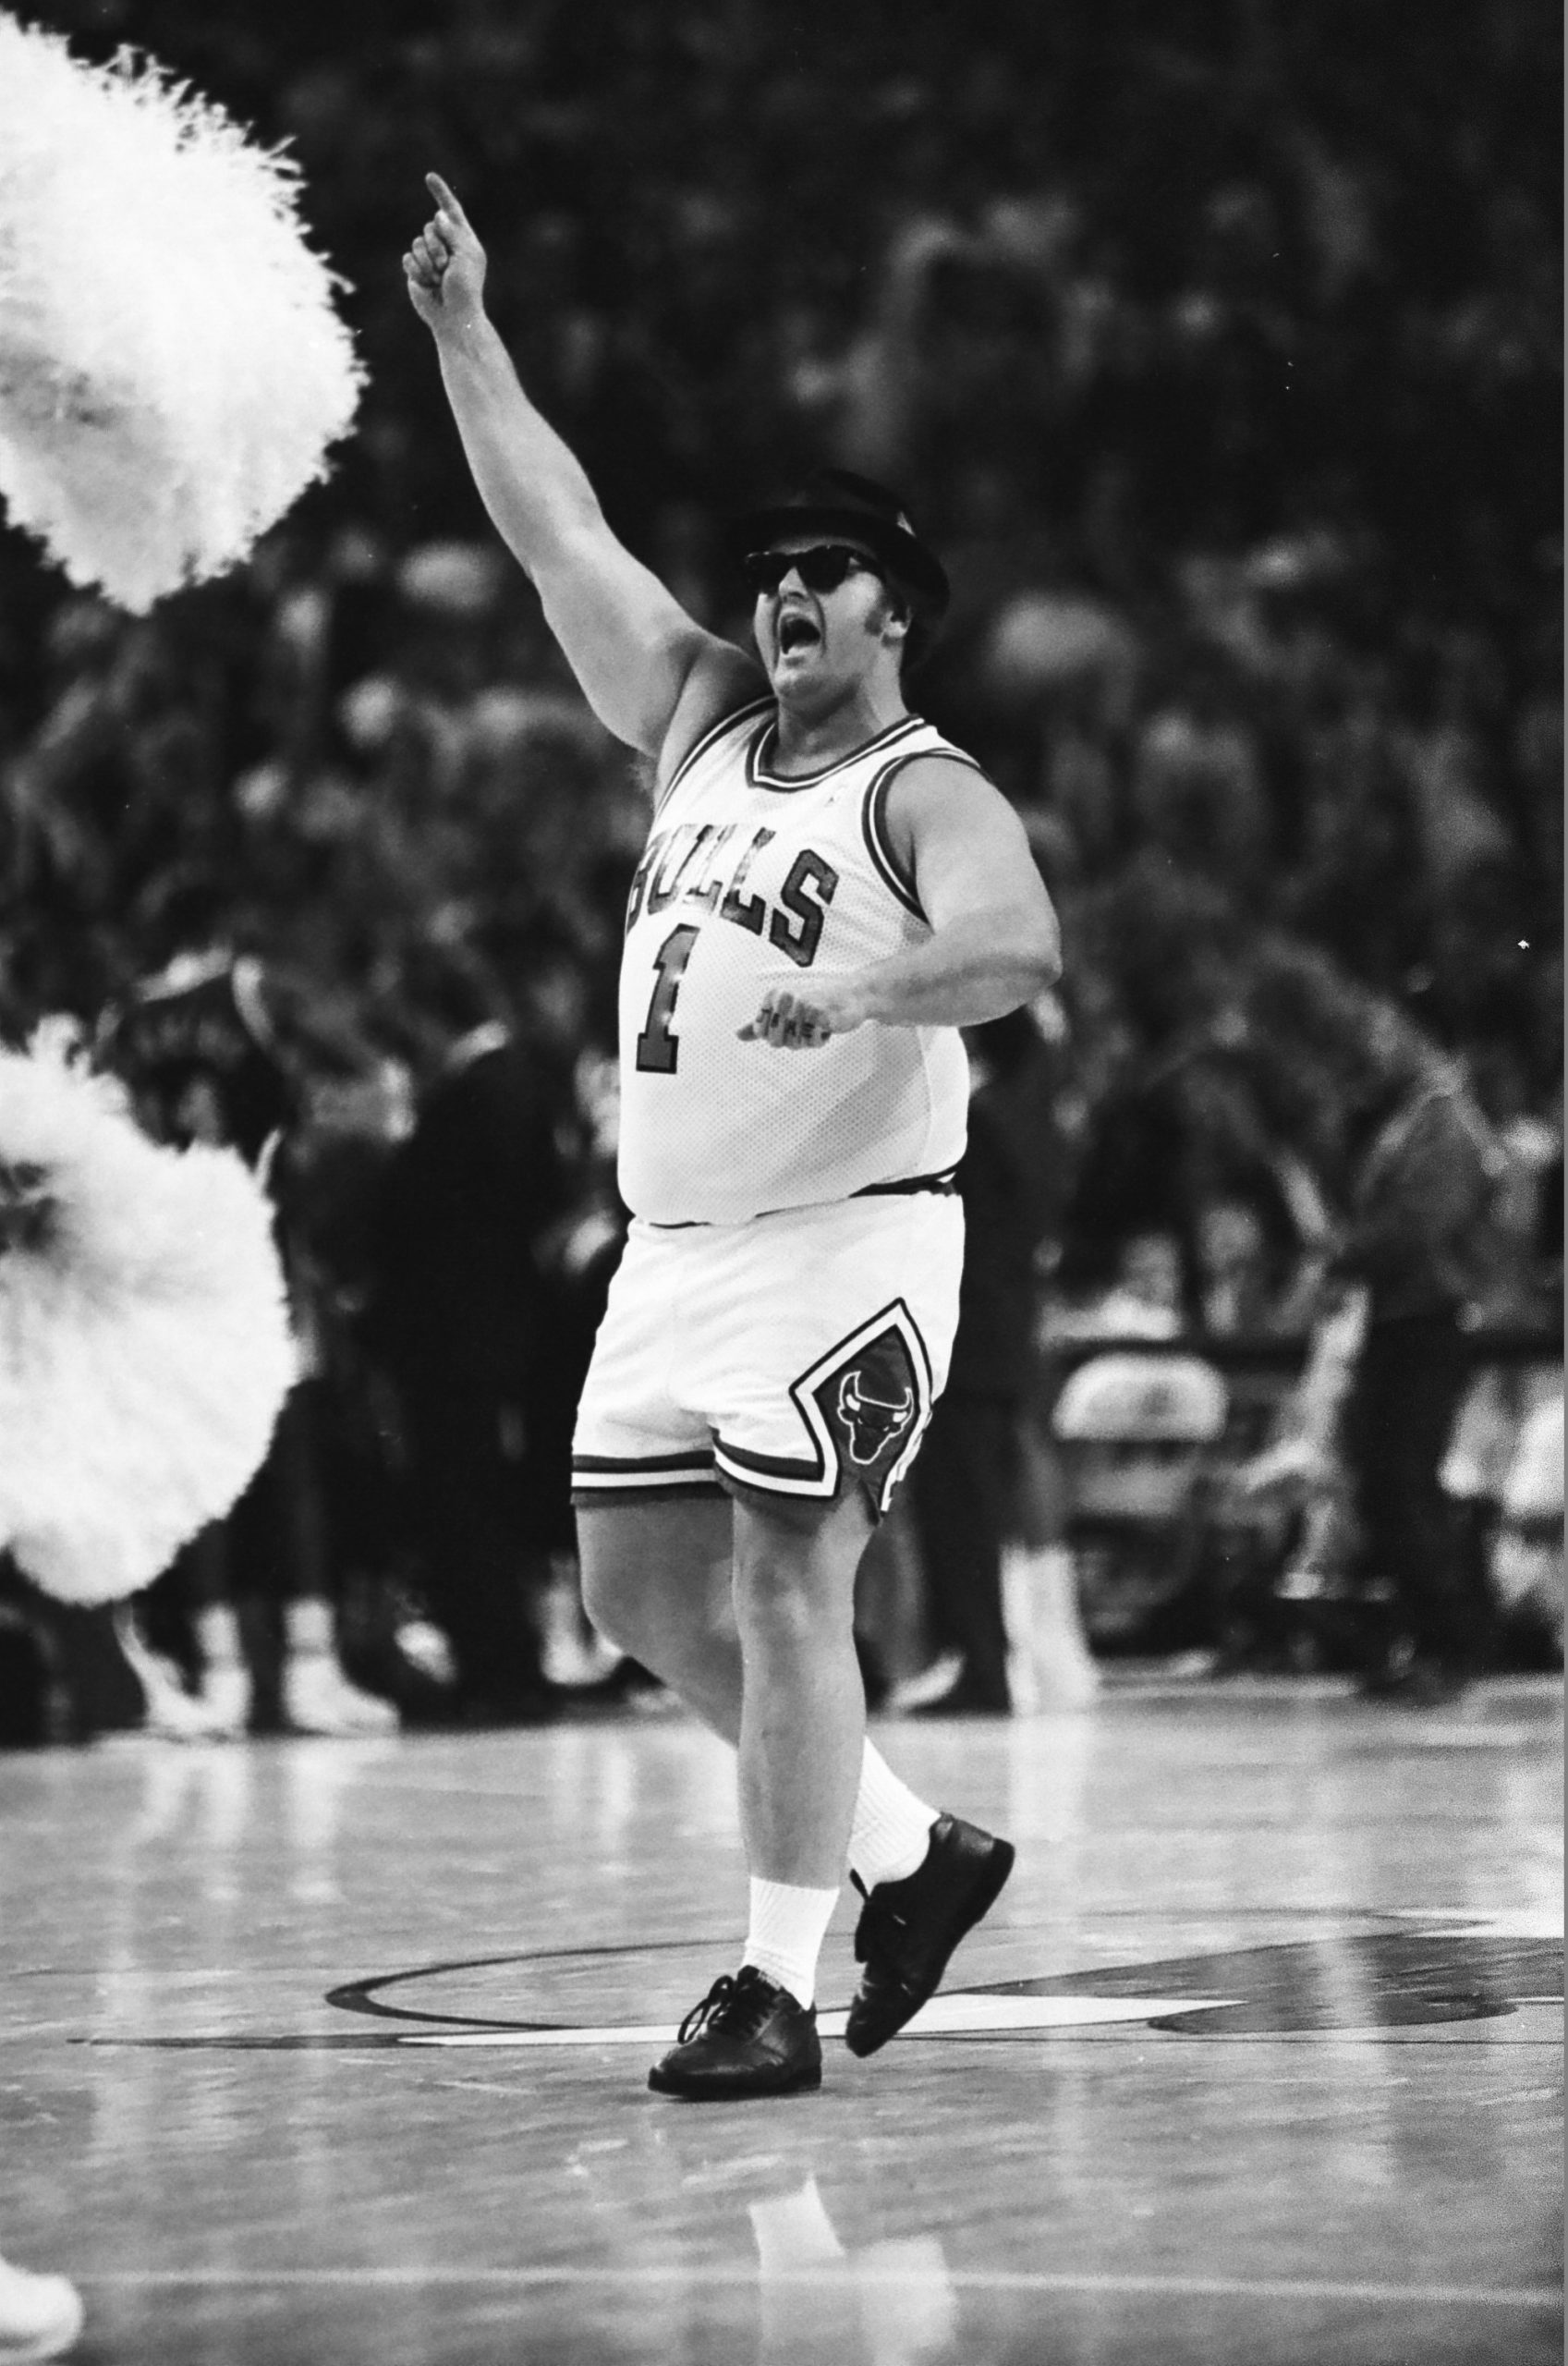 Blues Brother in a Bulls uniform entertains the crowd during a timeout